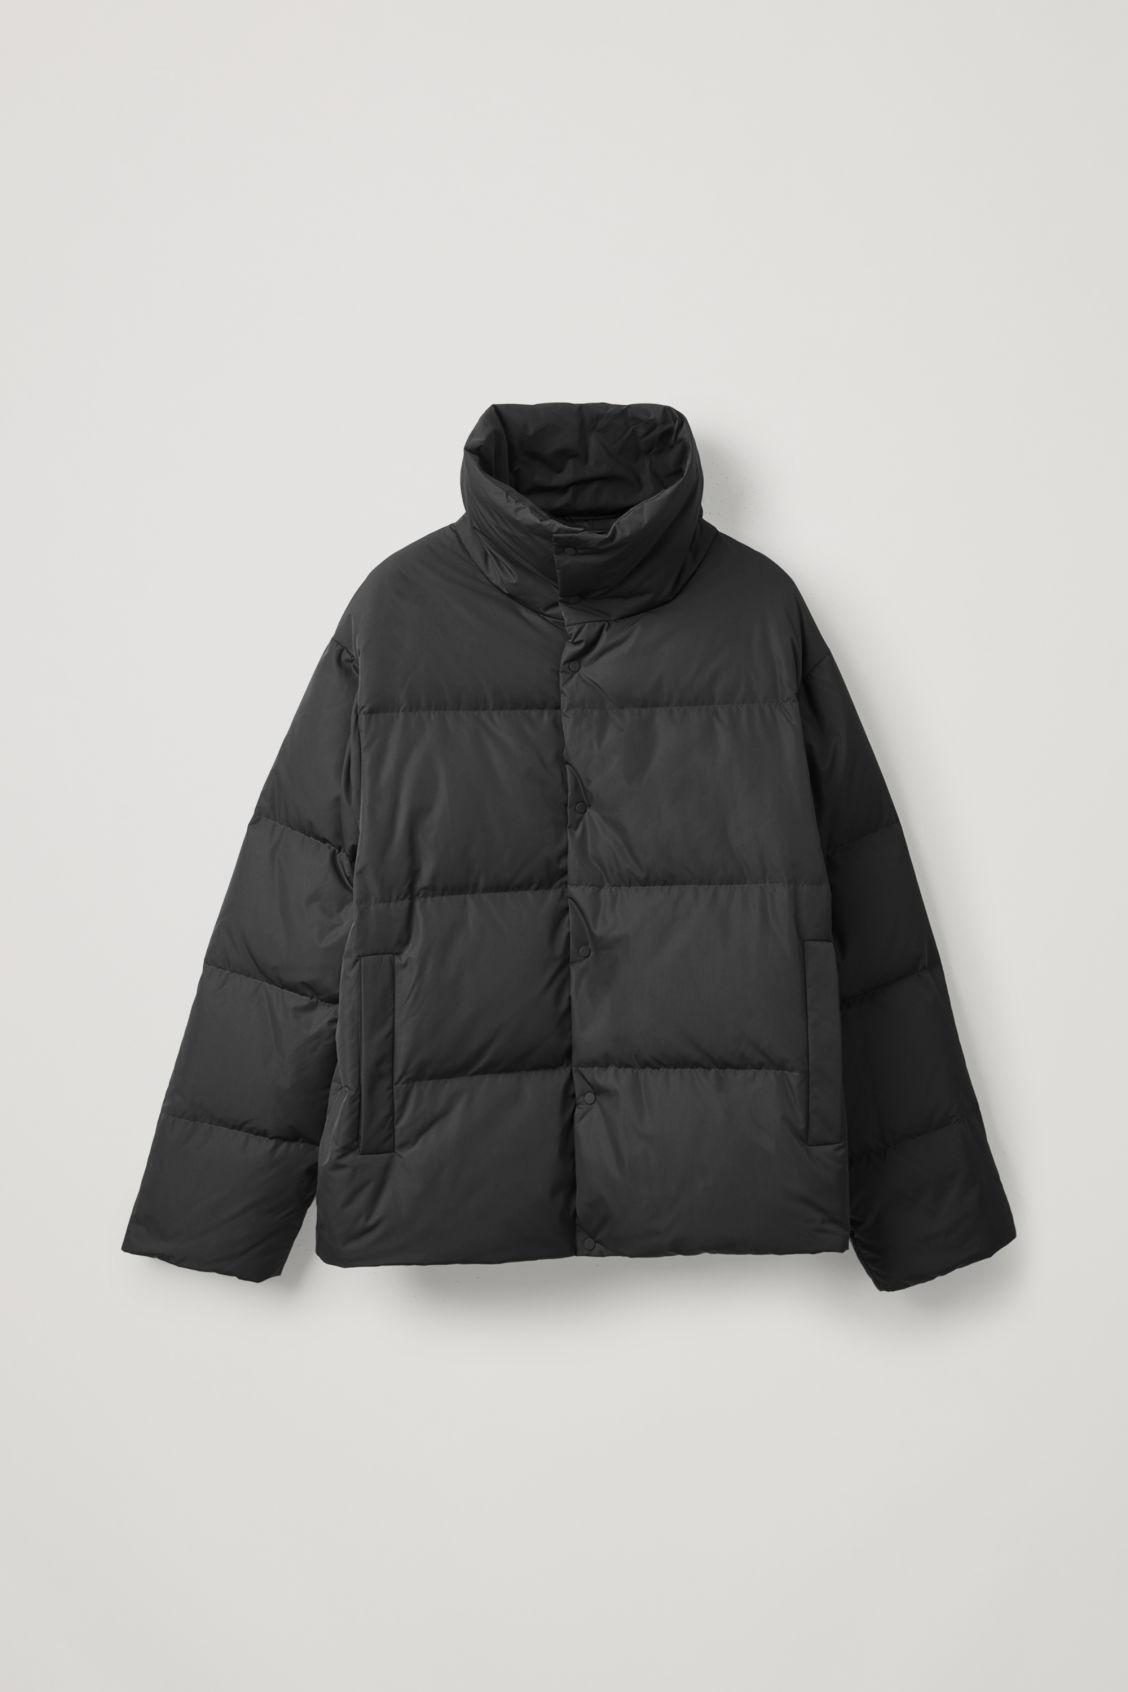 COS Synthetic Down Filled Short Puffer Jacket in Black for Men | Lyst